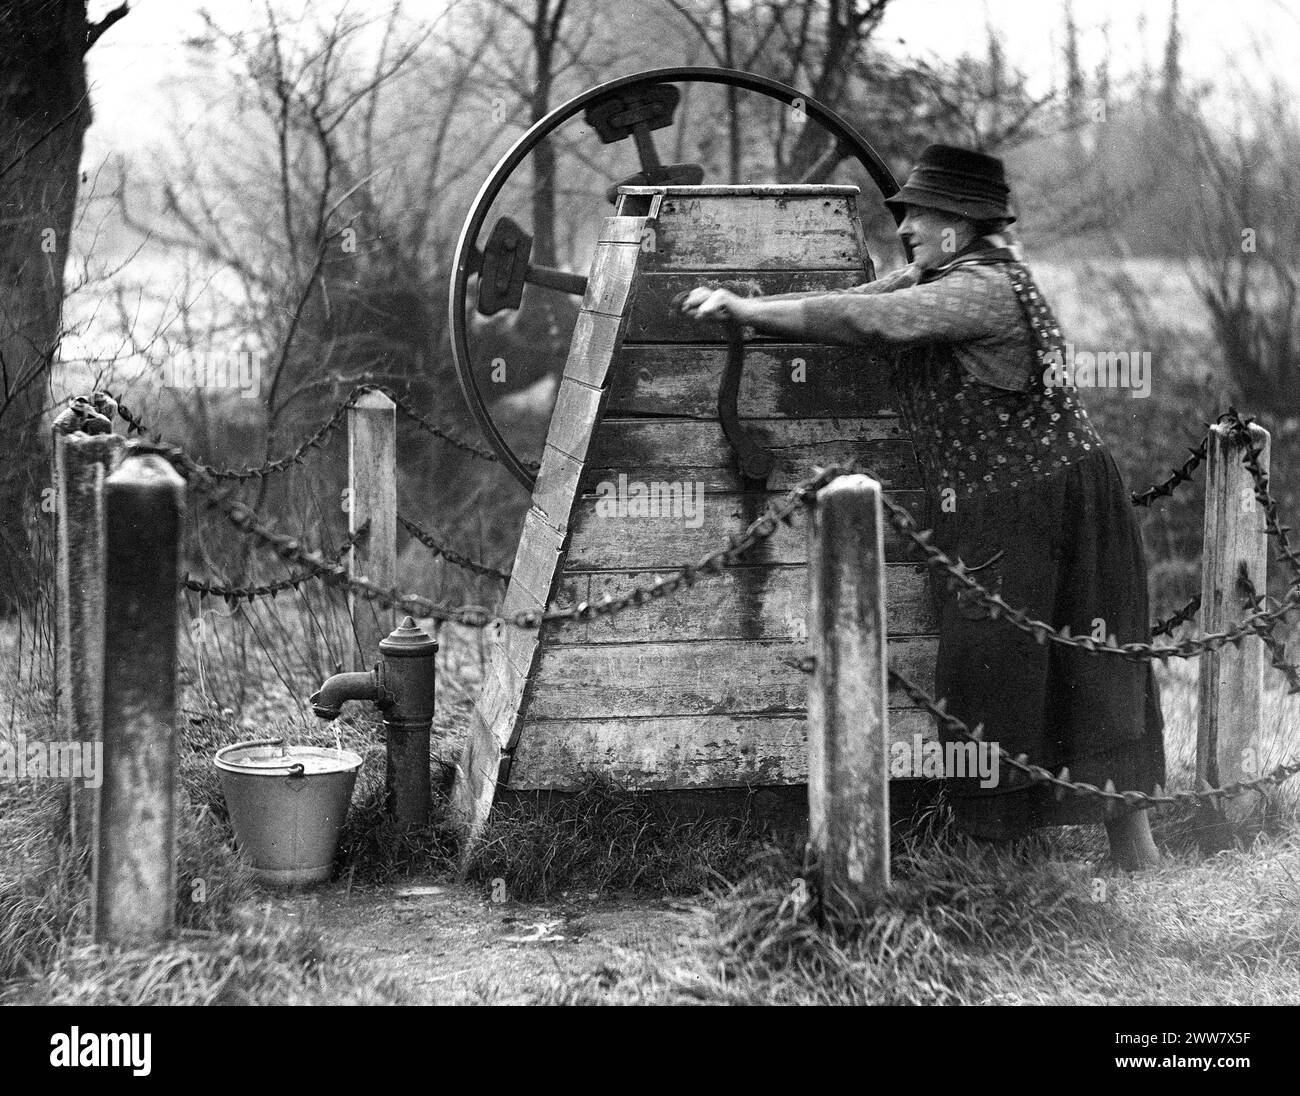 Woman pumping water from public water pump in Kent, England, Uk 1932 Stock Photo